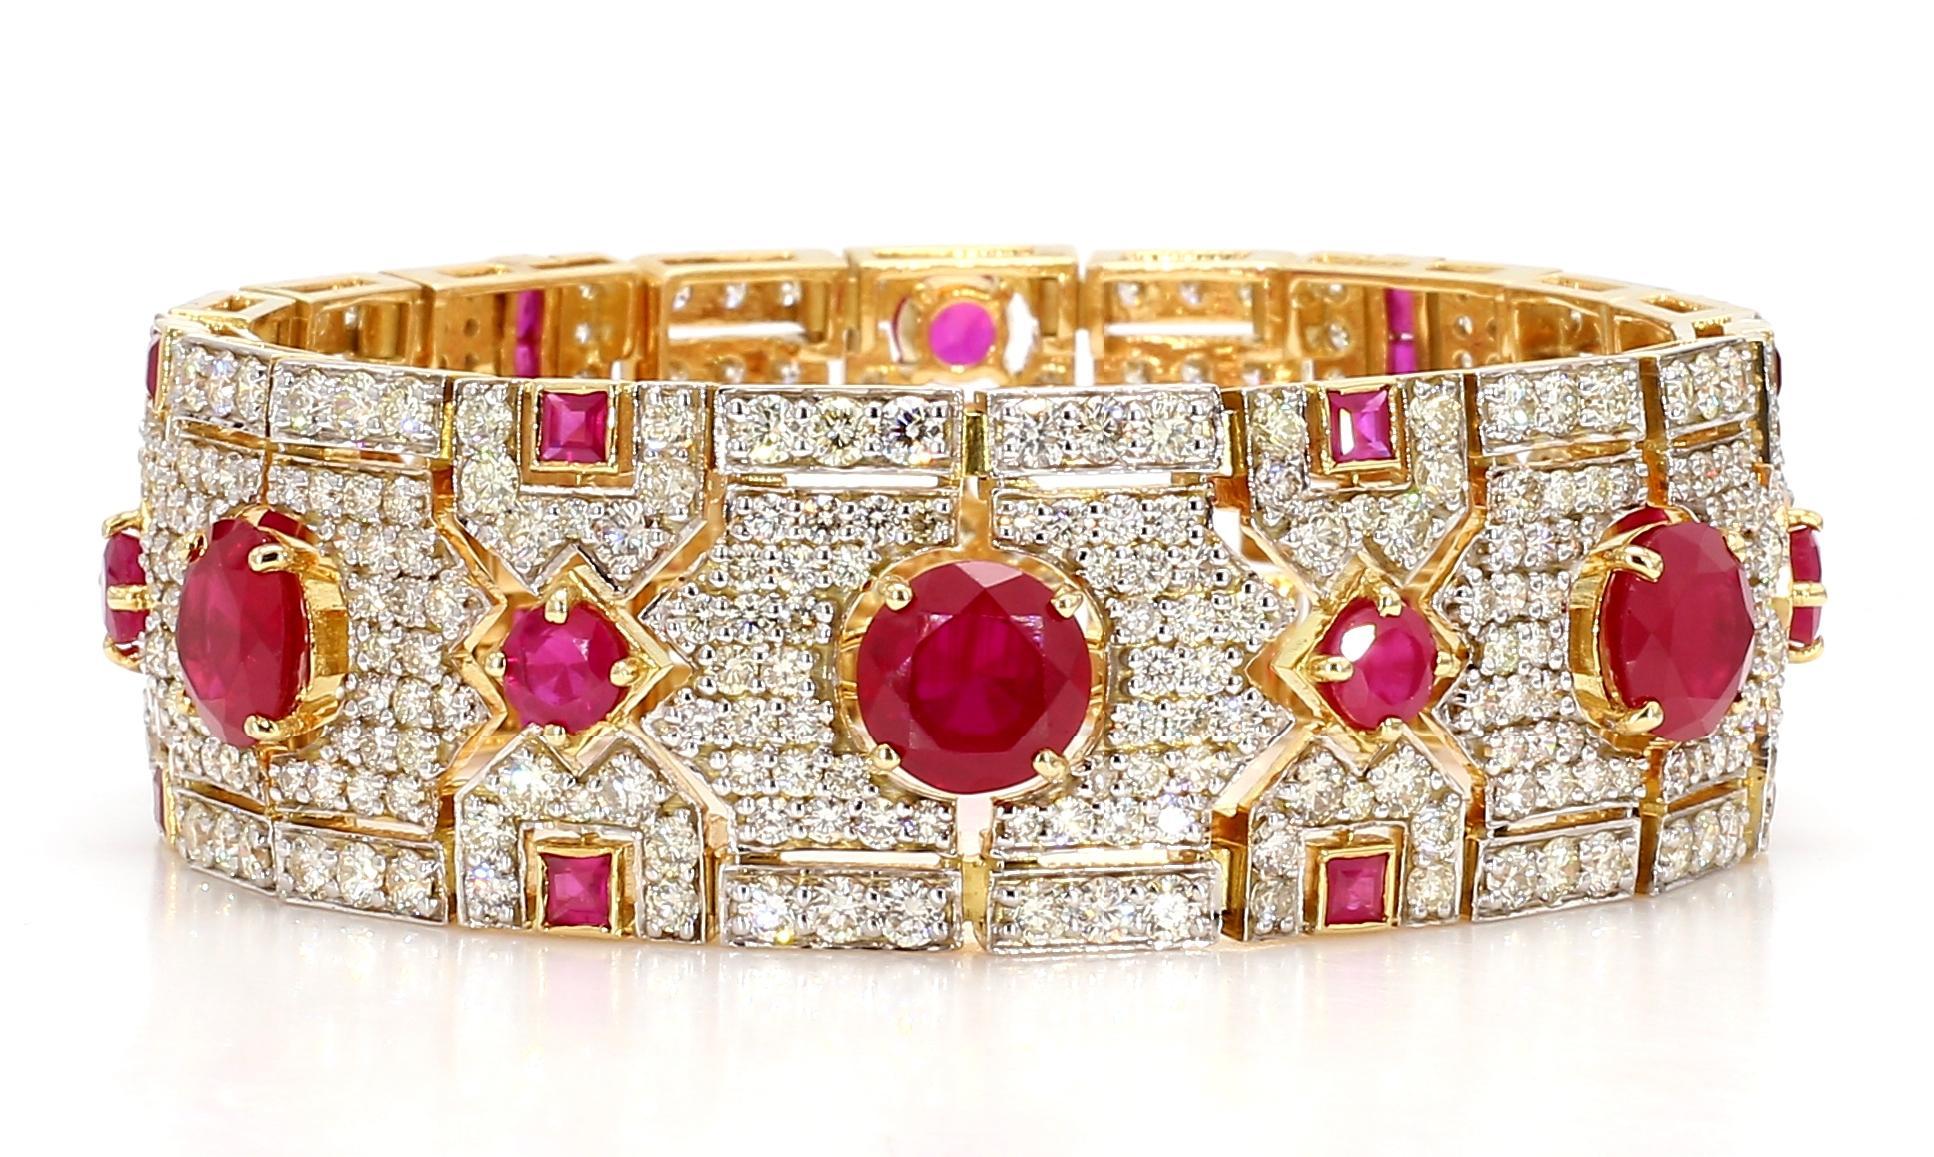 The Ruby Bracelet is an exquisite piece of jewelry that showcases the timeless beauty and elegance of rubies. Crafted with precision and finesse, this bracelet exudes a luxurious charm, making it the perfect accessory for any special occasion or